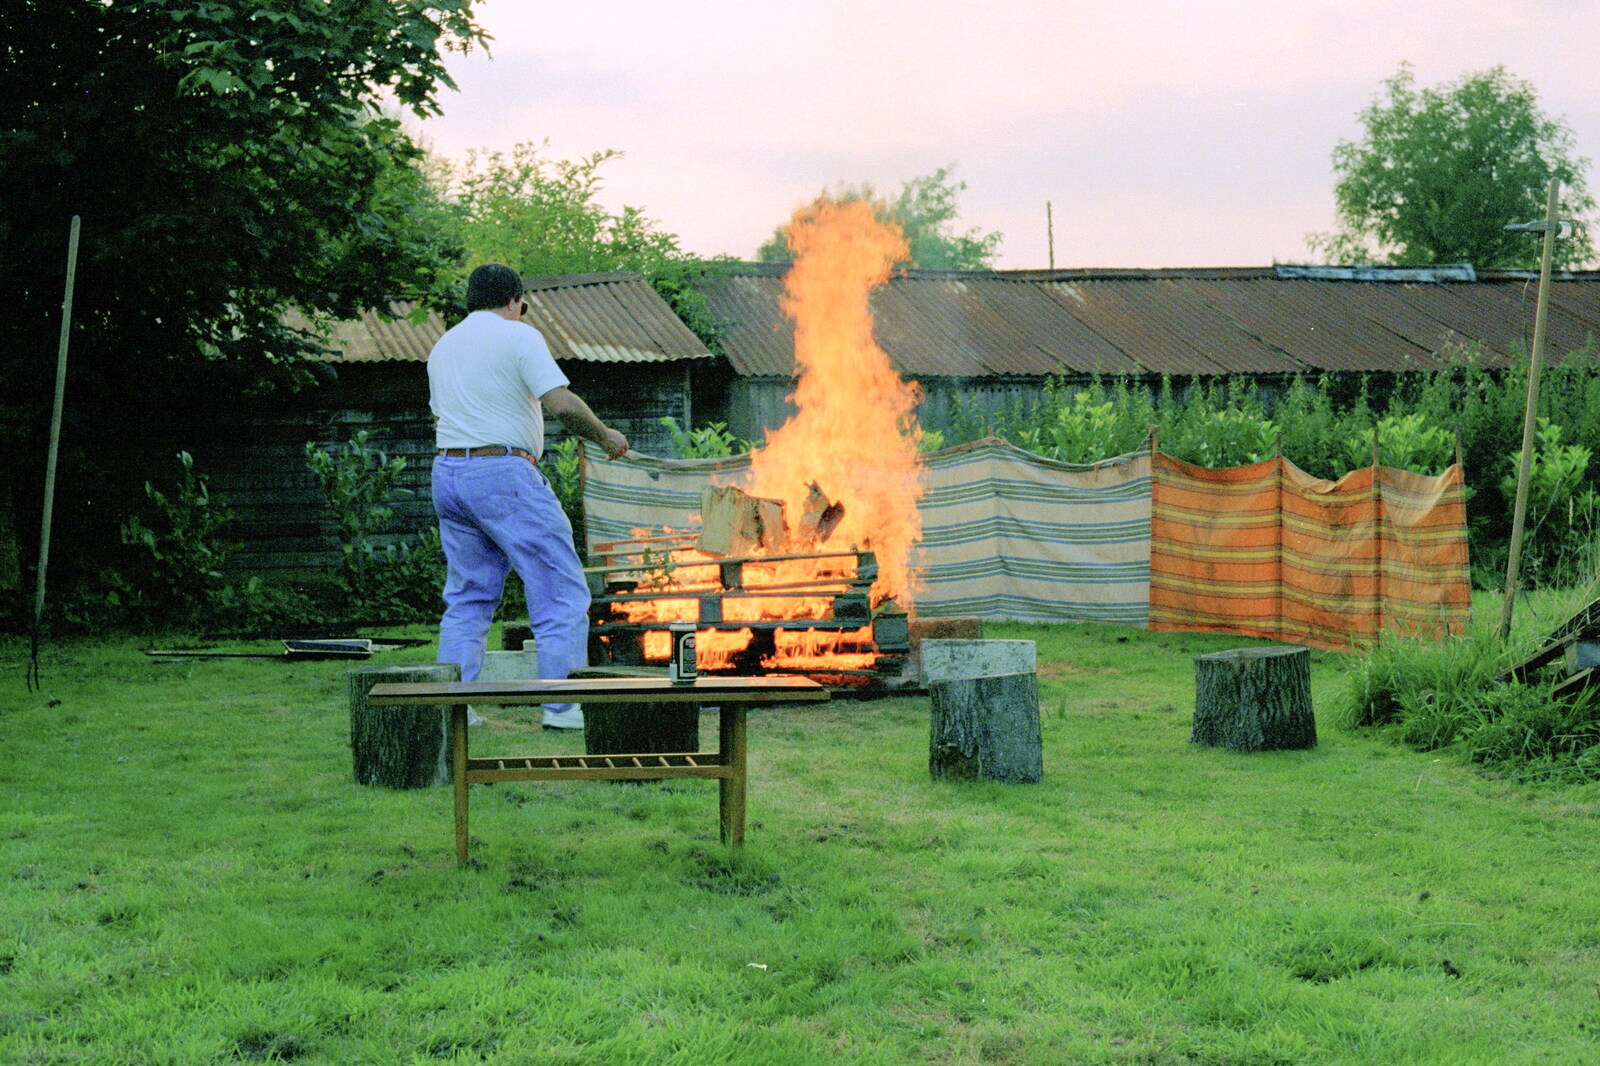 Corky helps 'clean' the barbeque with fire from A Geoff and Brenda Barbeque, Stuston, Suffolk - 3rd April 1994